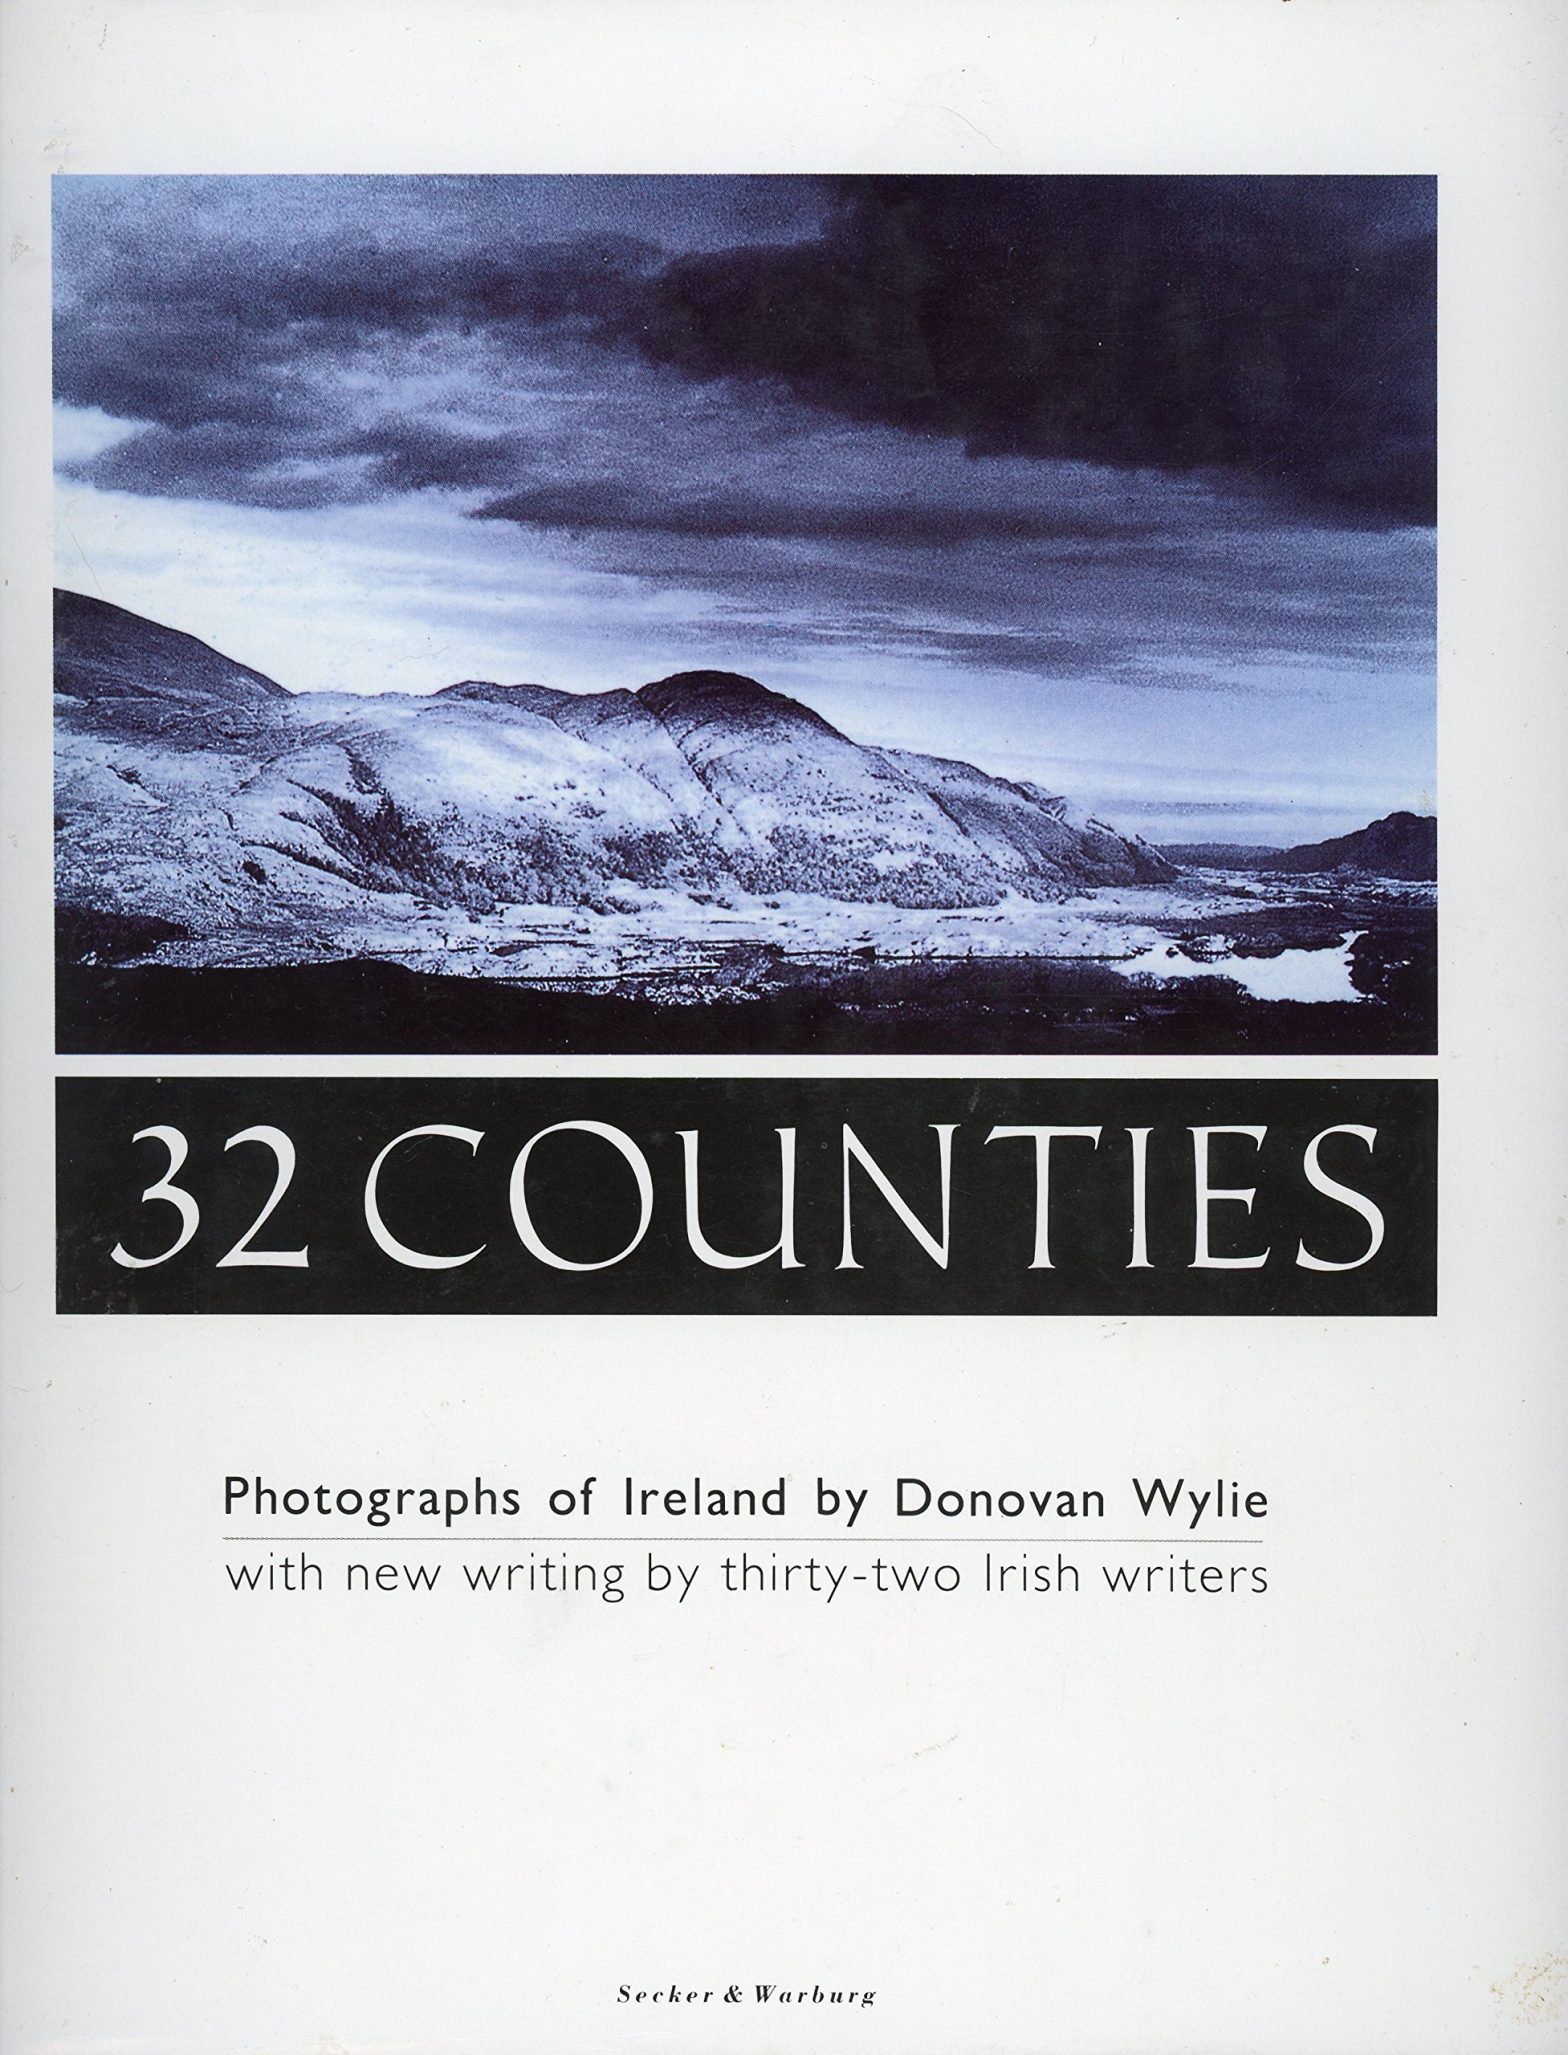 32 Counties Photographs of Ireland Donovan Wylie